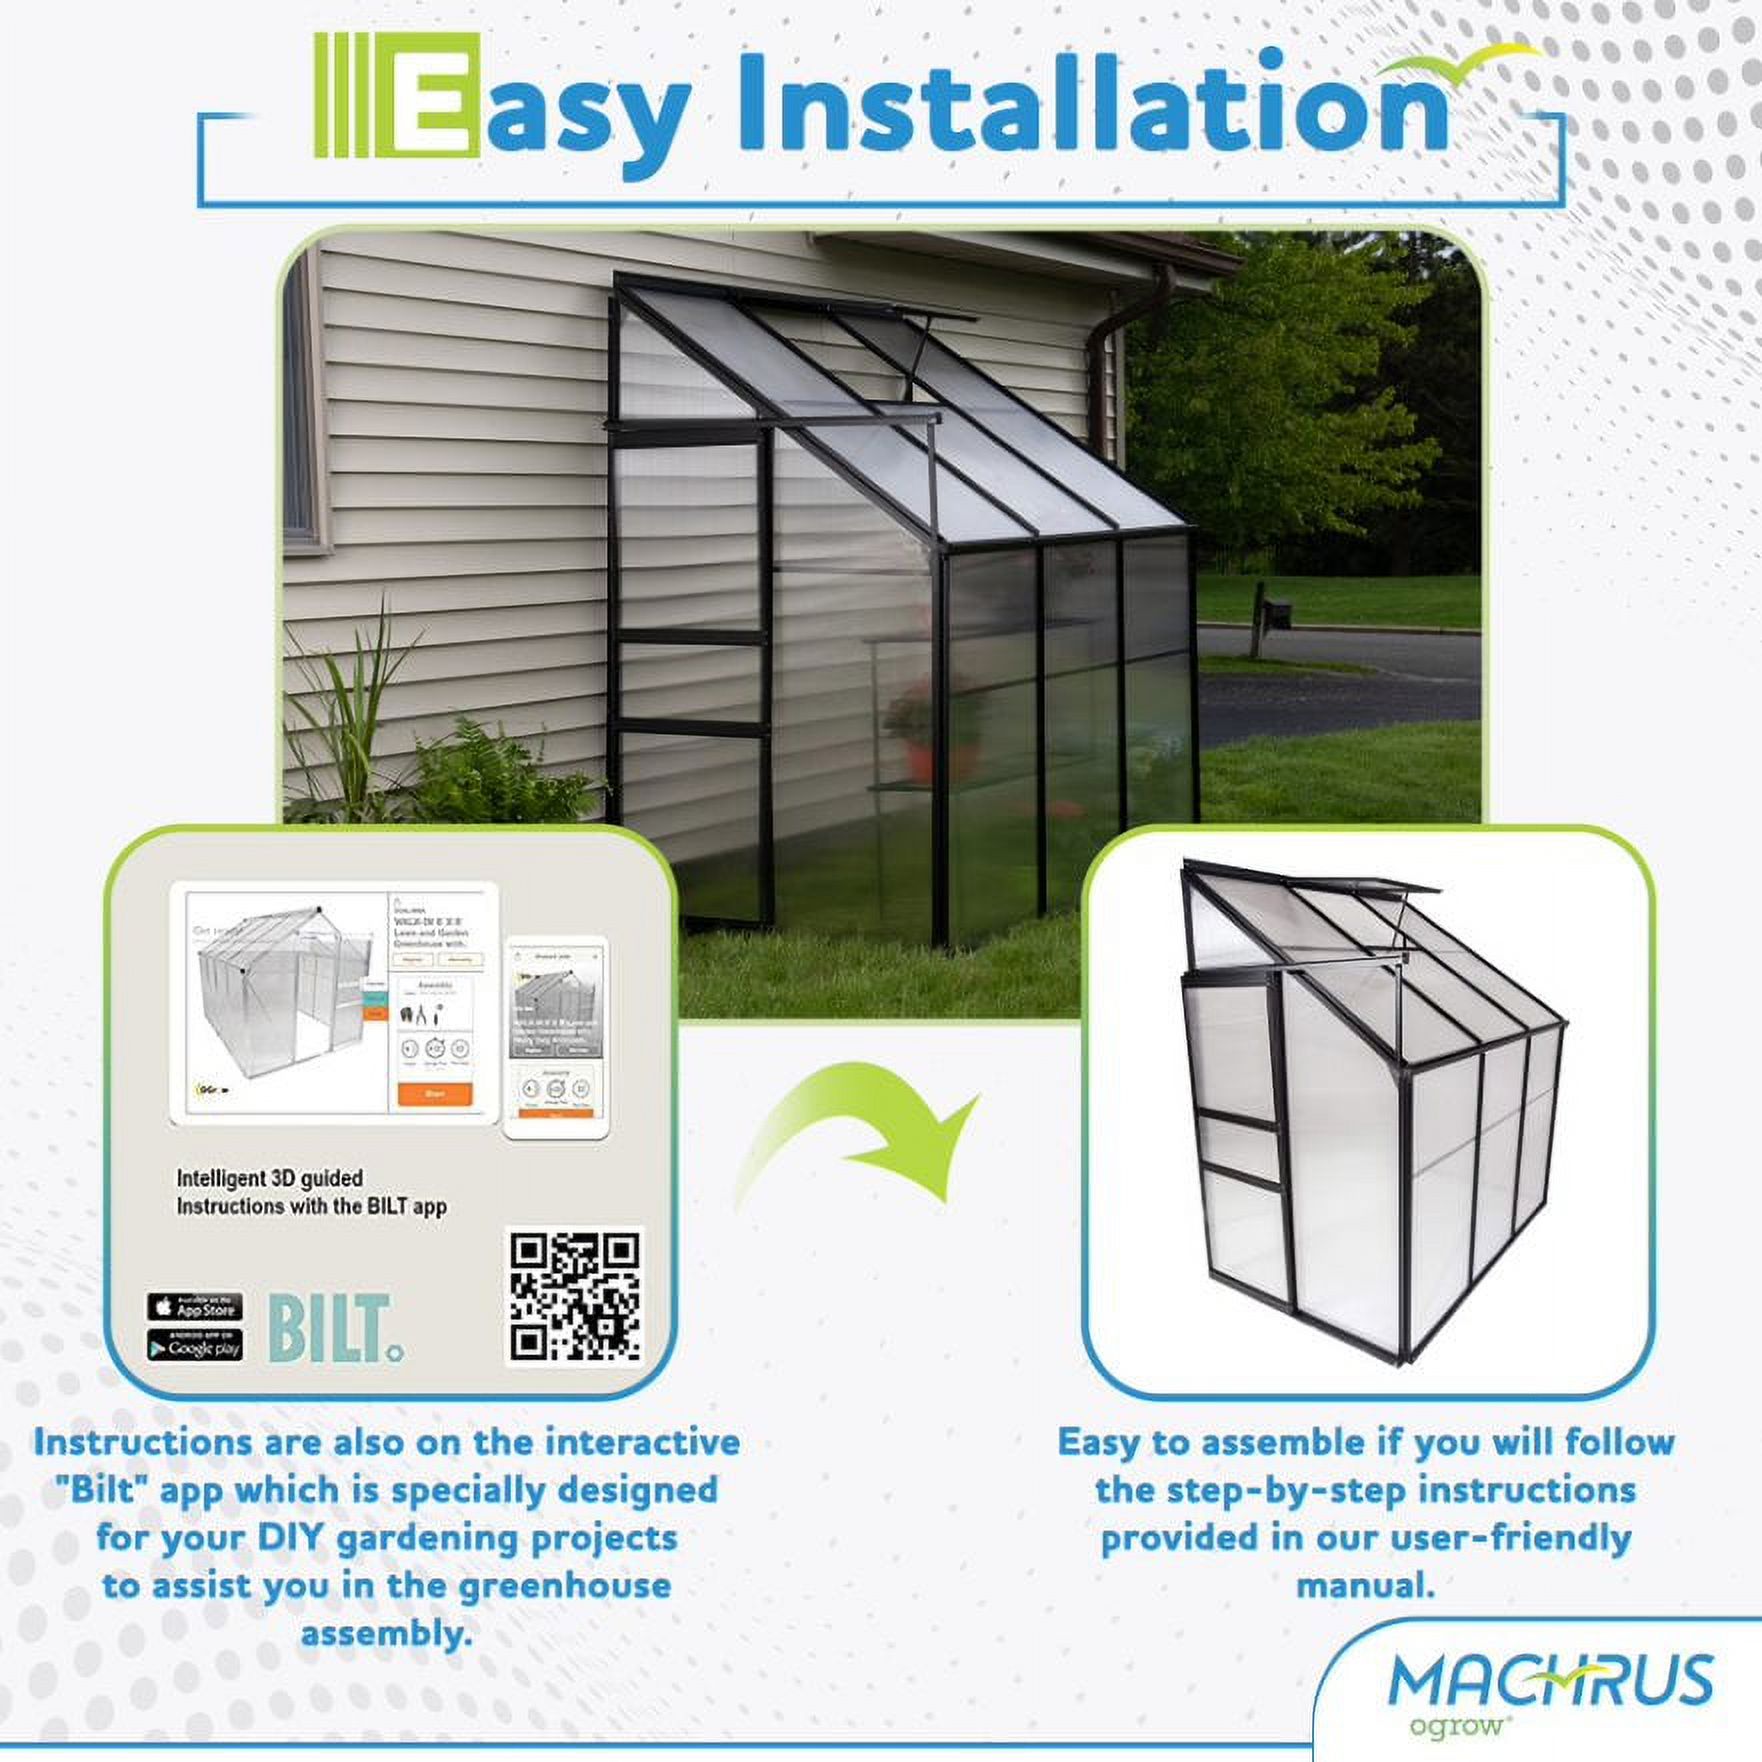 Machrus Ogrow 4 x 6 FT Lean-To-Wall Walk-In Greenhouse with Sliding Door and Adjustable Roof Vent - image 4 of 7